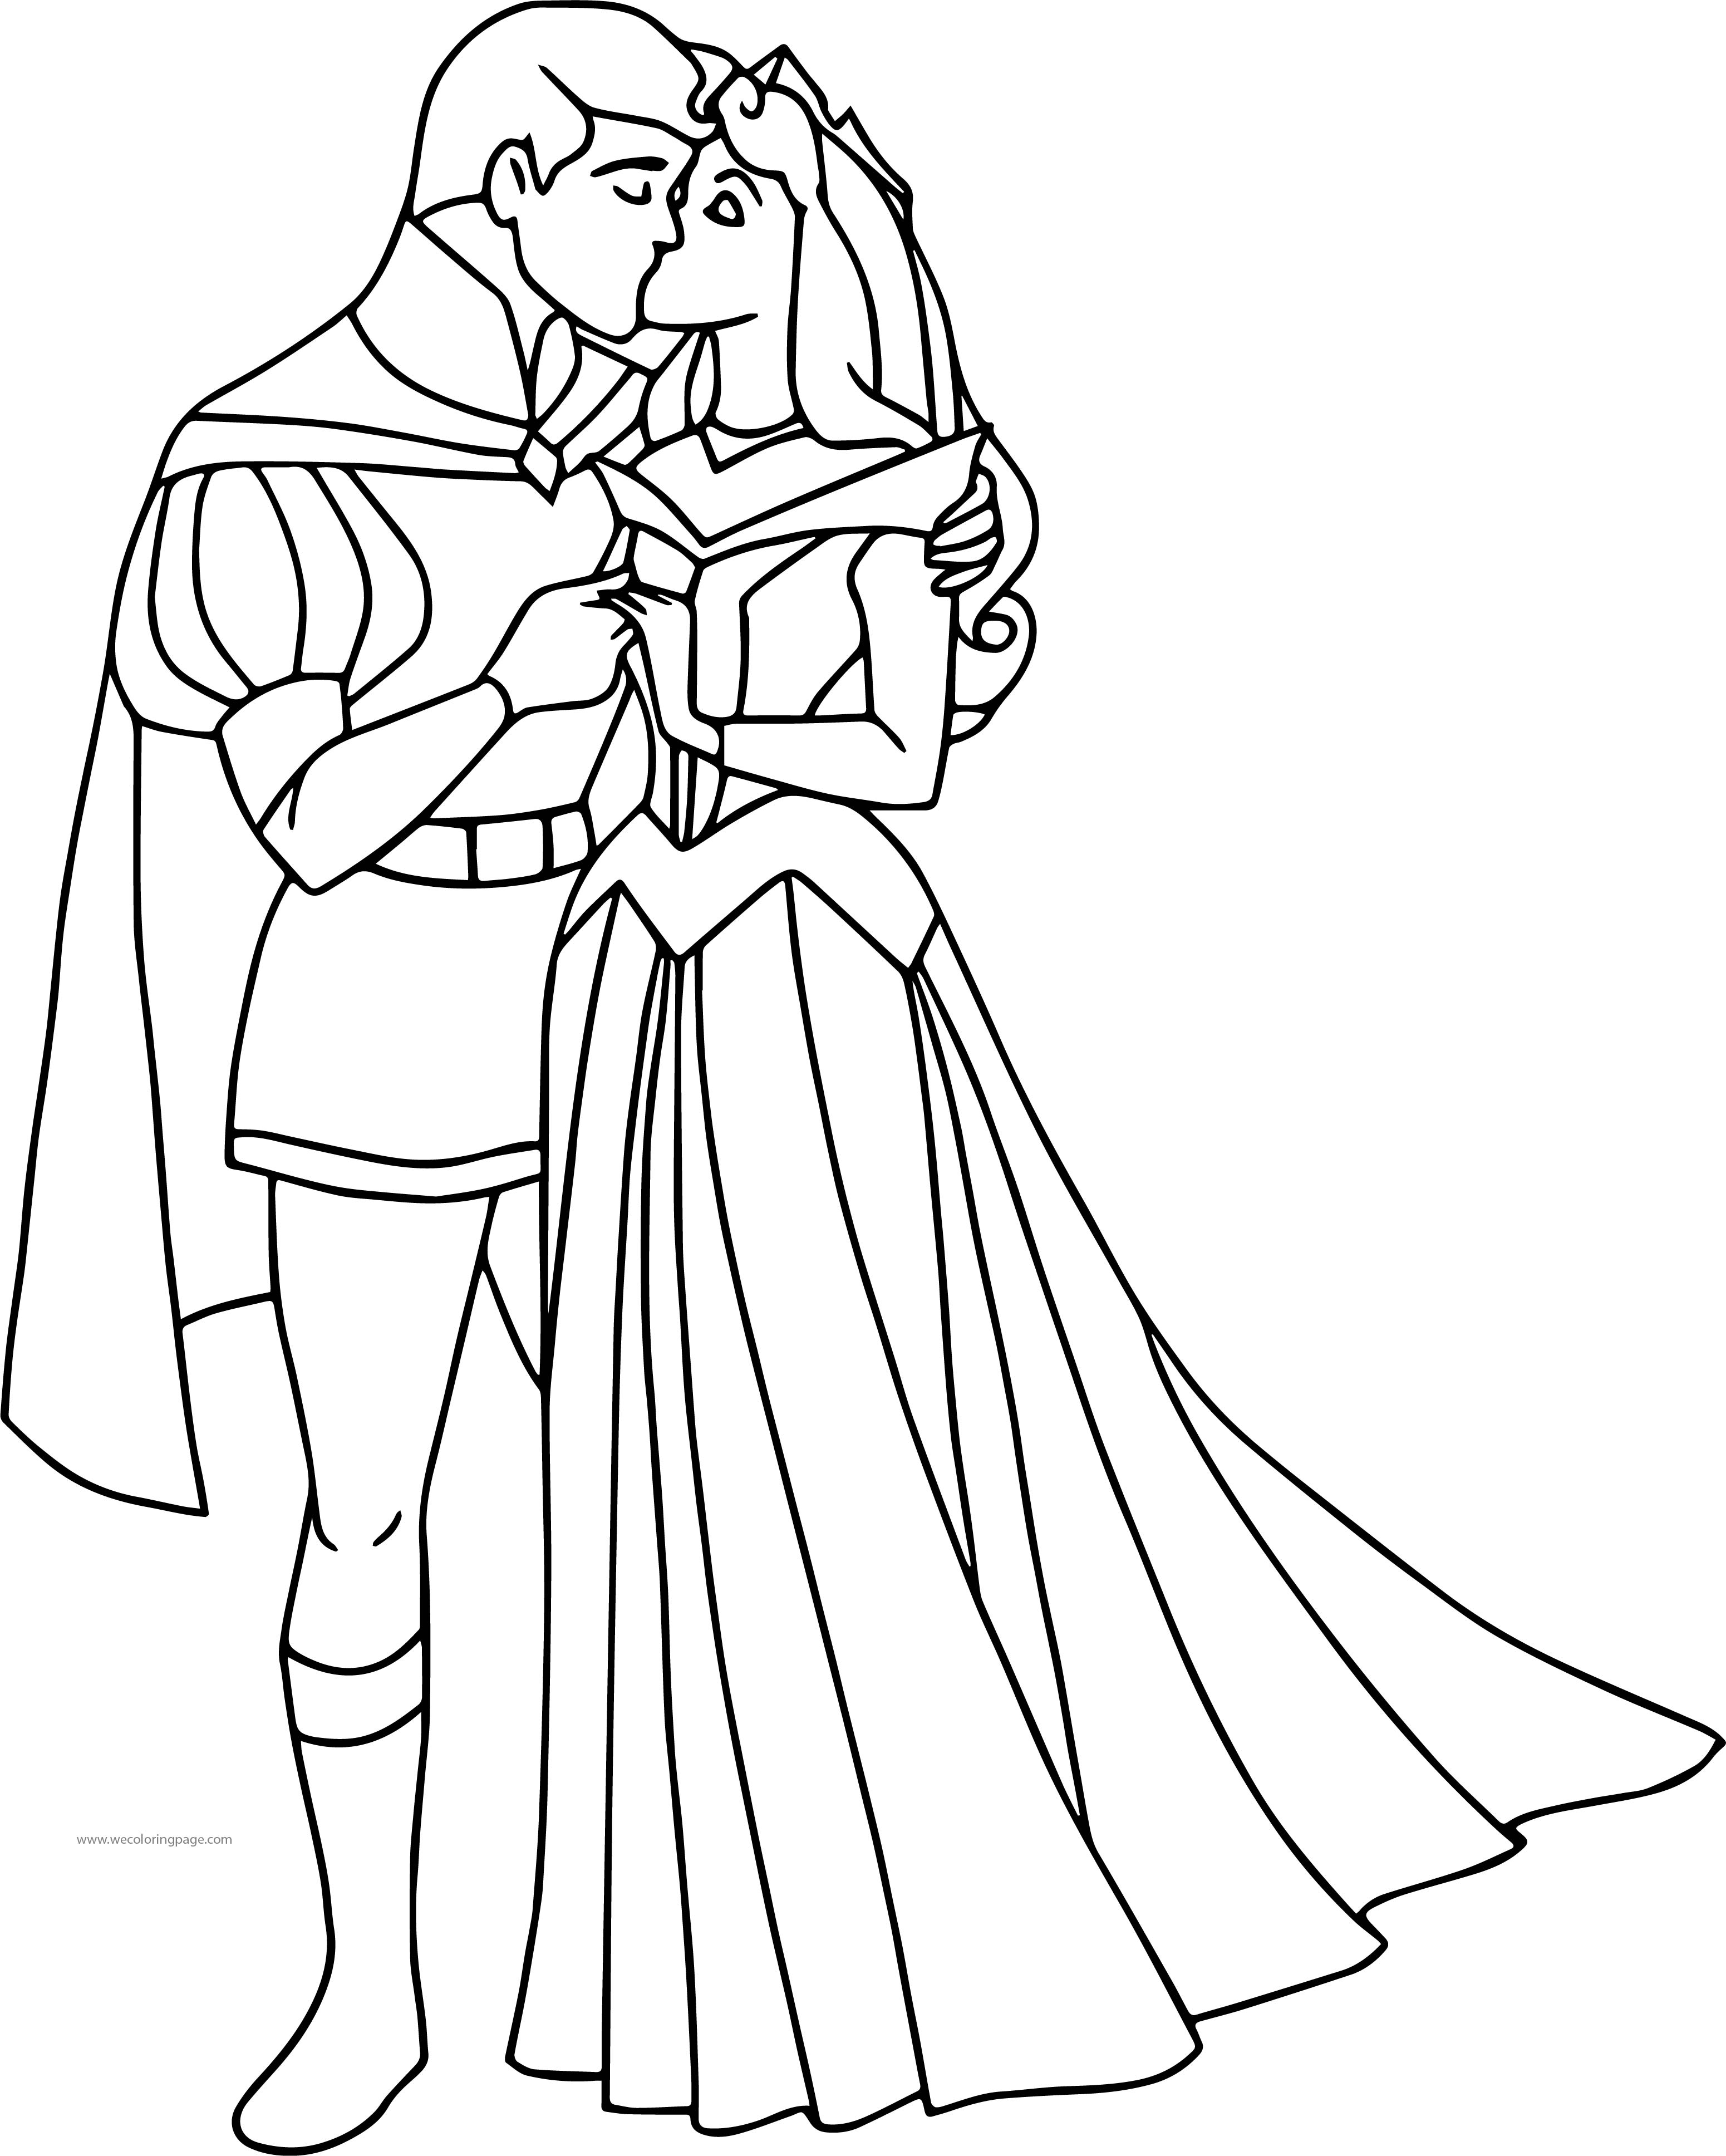 Sleeping Beauty And Prince Philip Coloring Pages Hol dir